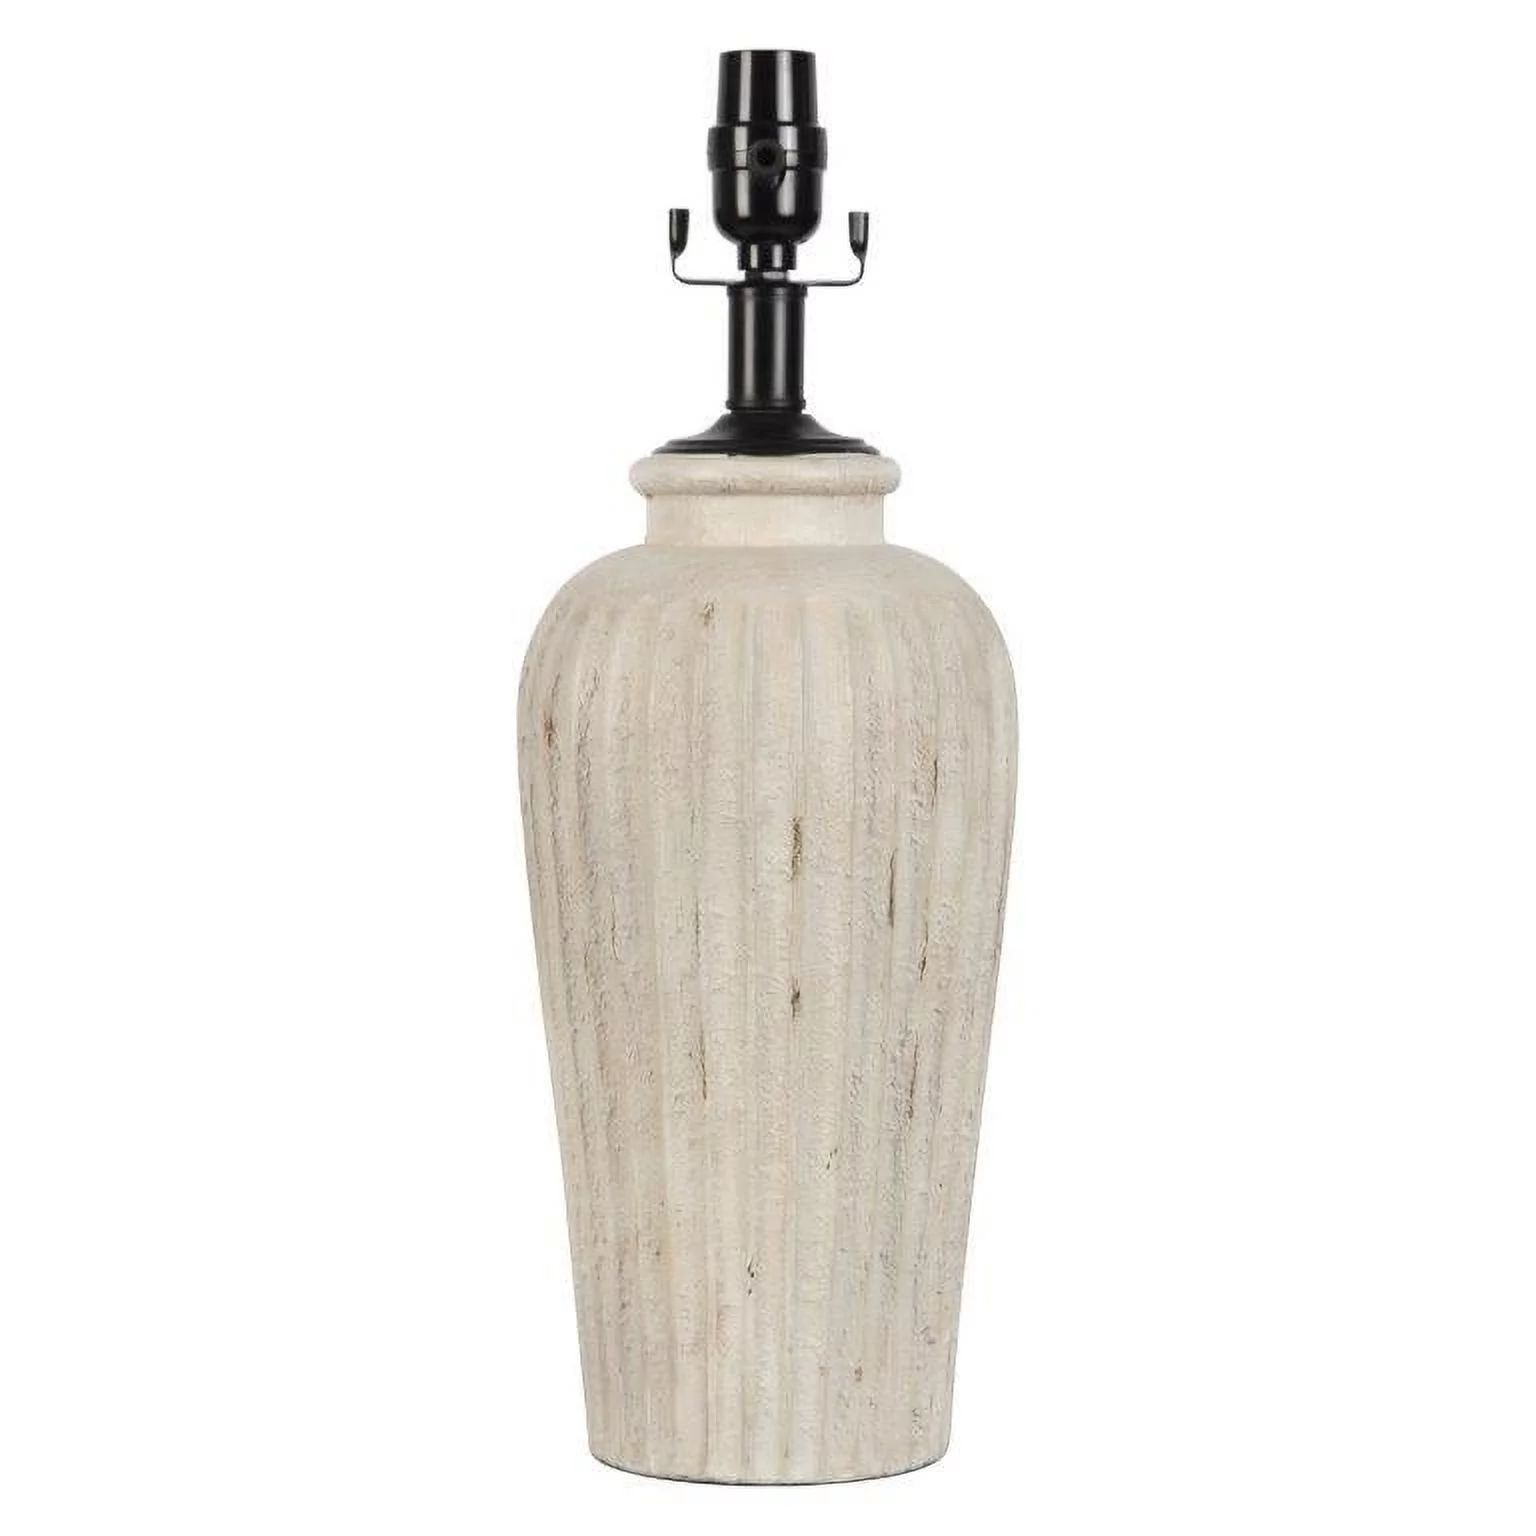 Simplee Adesso Beige Ribbed Ceramic Table Lamp Base, 18"H, Transitional, Adult Use | Walmart (US)